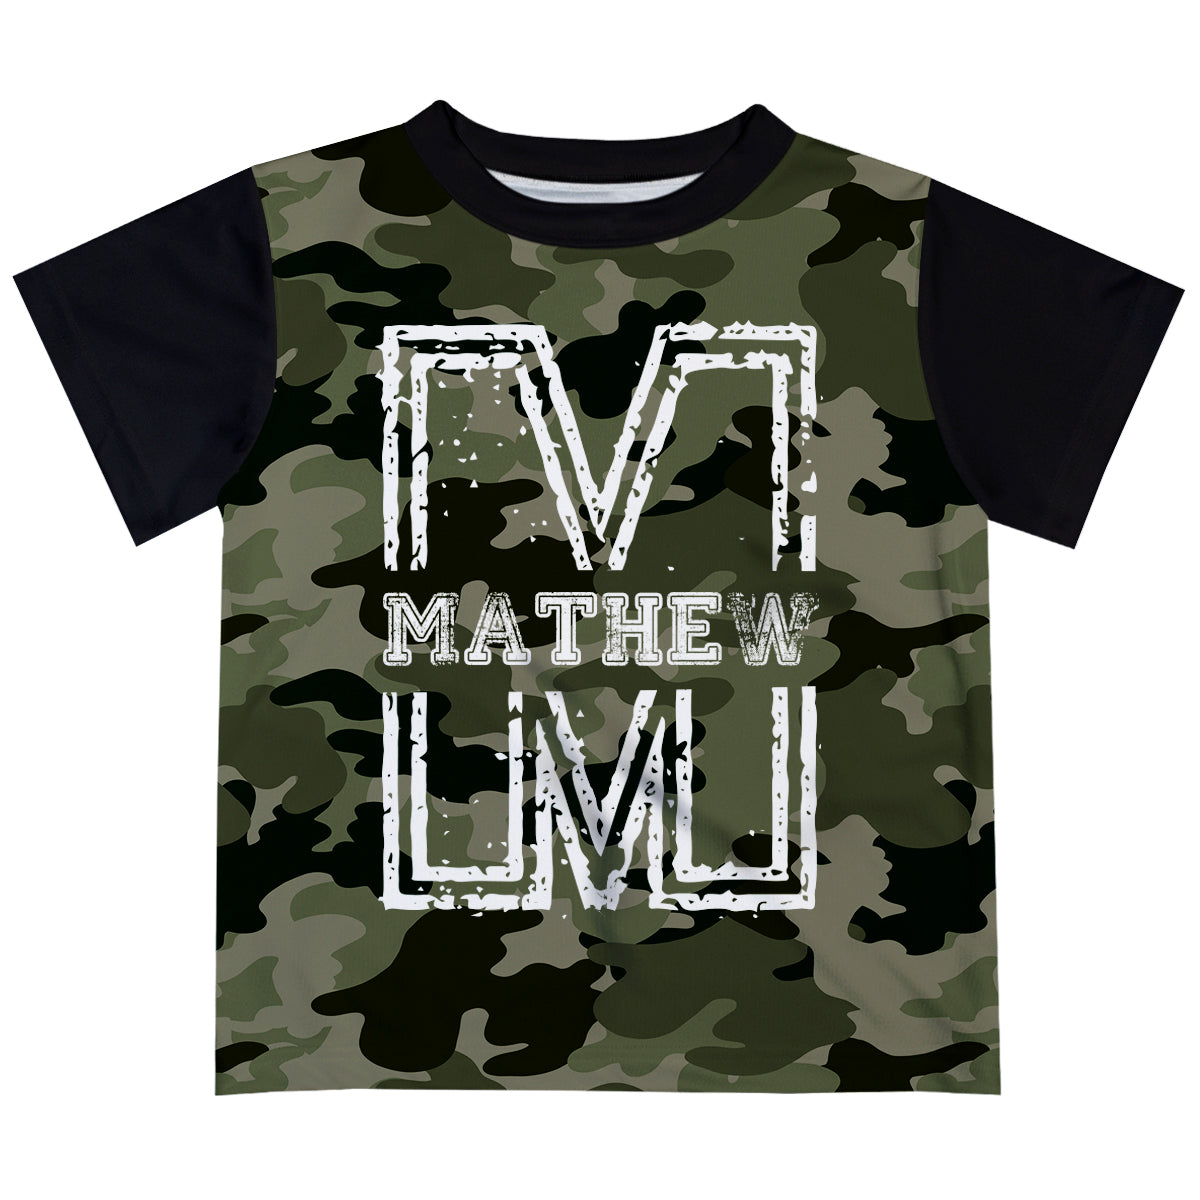 Boys green camo and white short sleeve tee shirt with name and initial - Wimziy&Co.